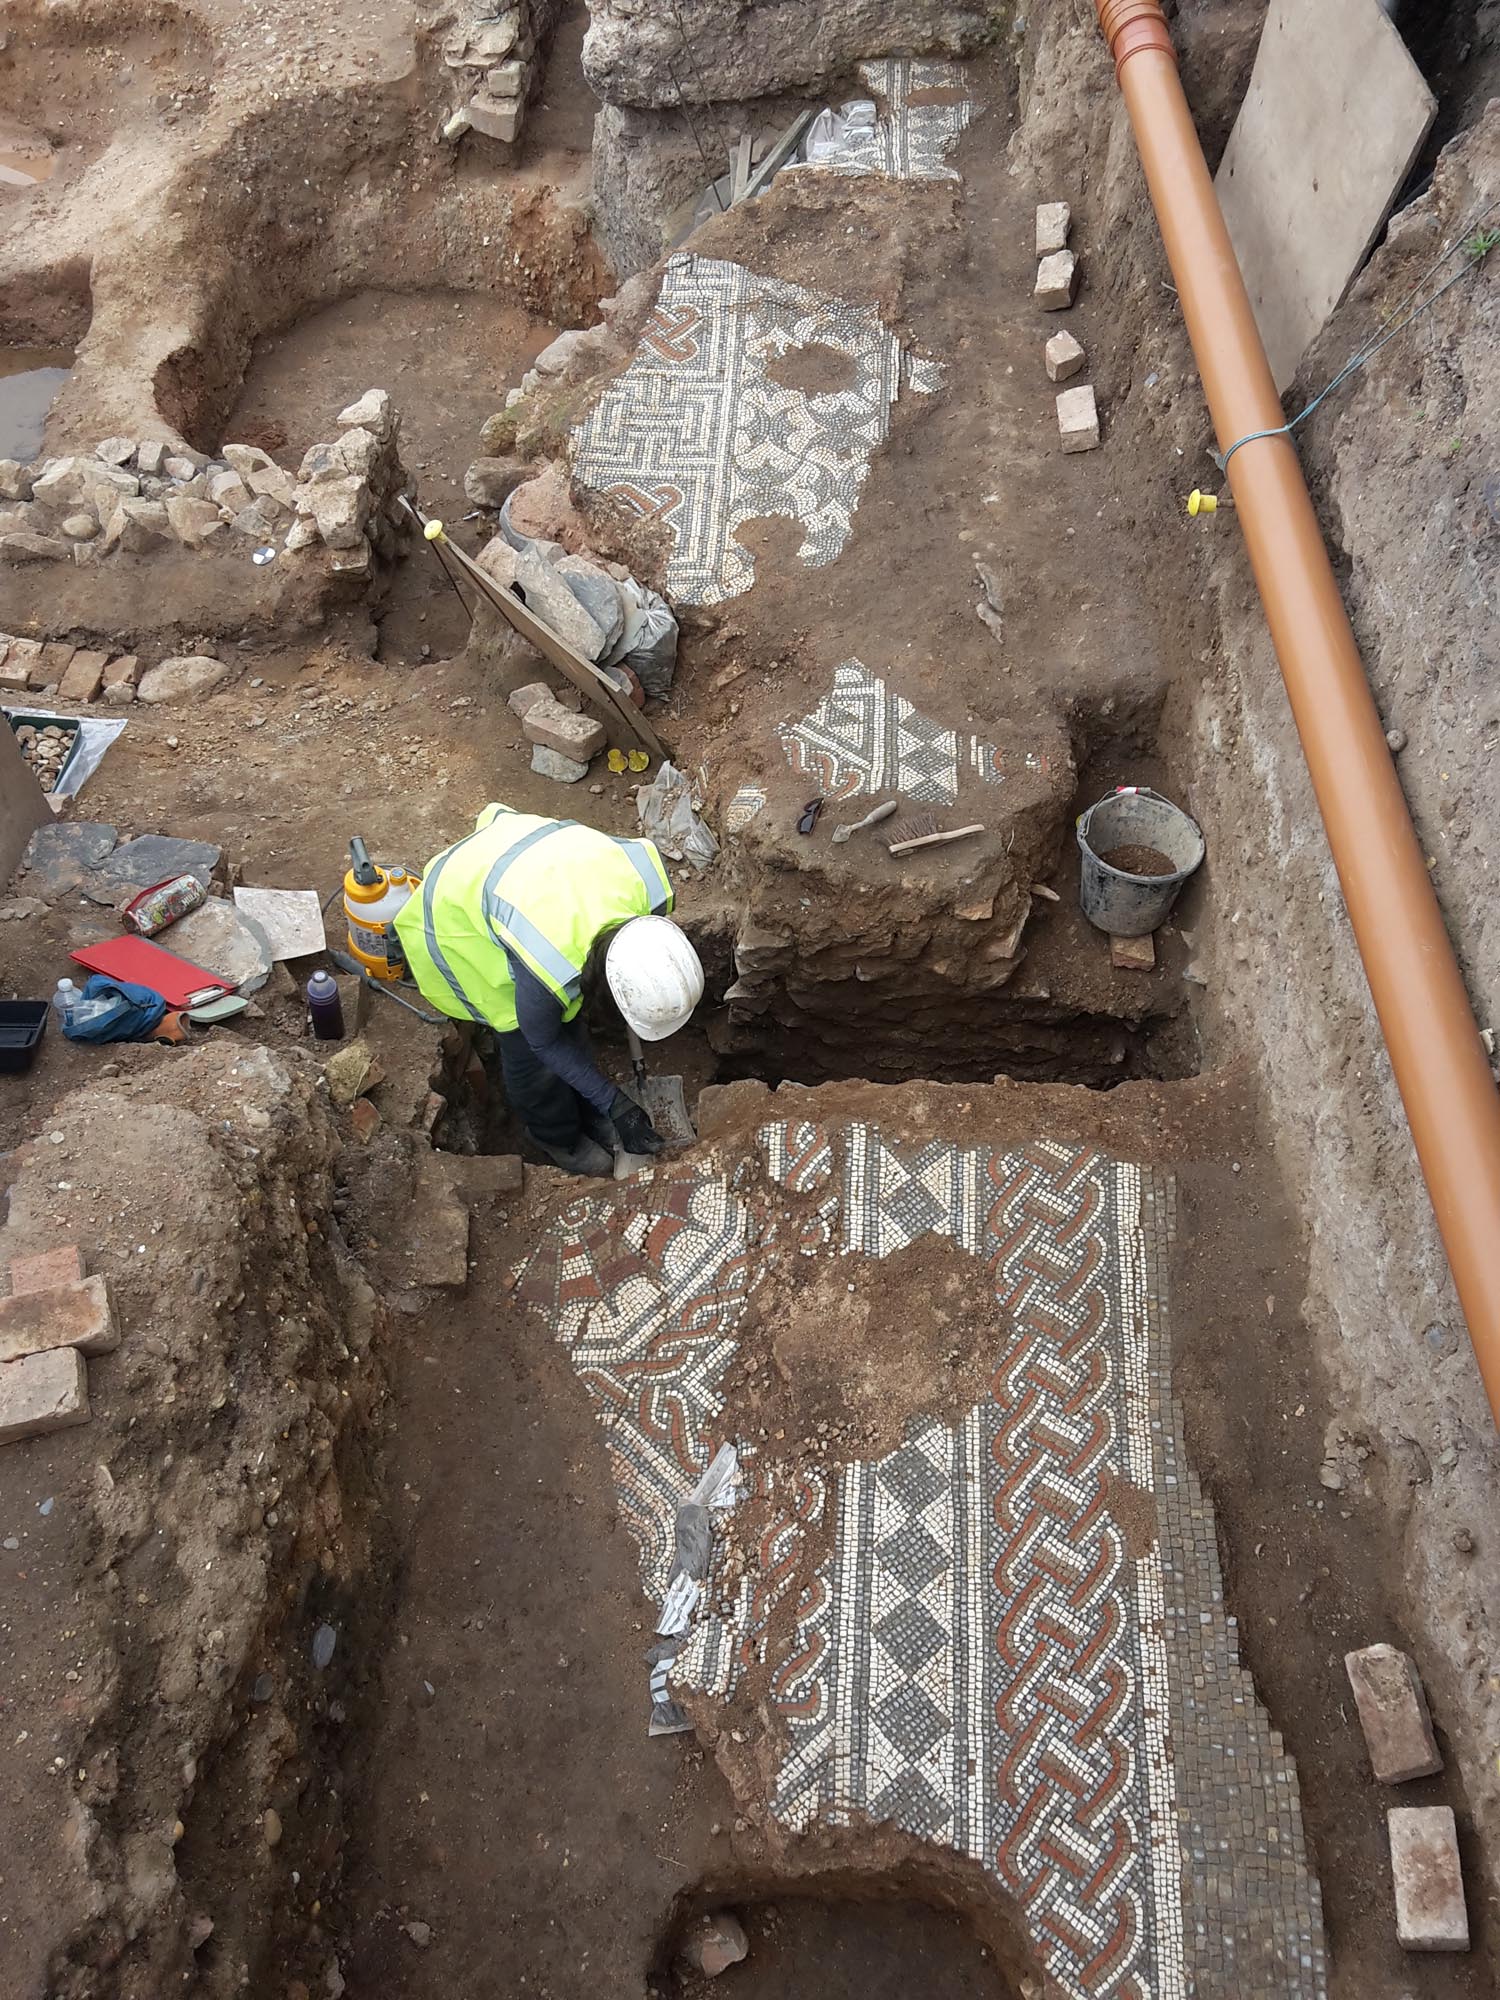 Part of an intricately decorated Roman mosaic is excavated near Vaughan Way and Highcross Street - University of Leicester Archaeological Services